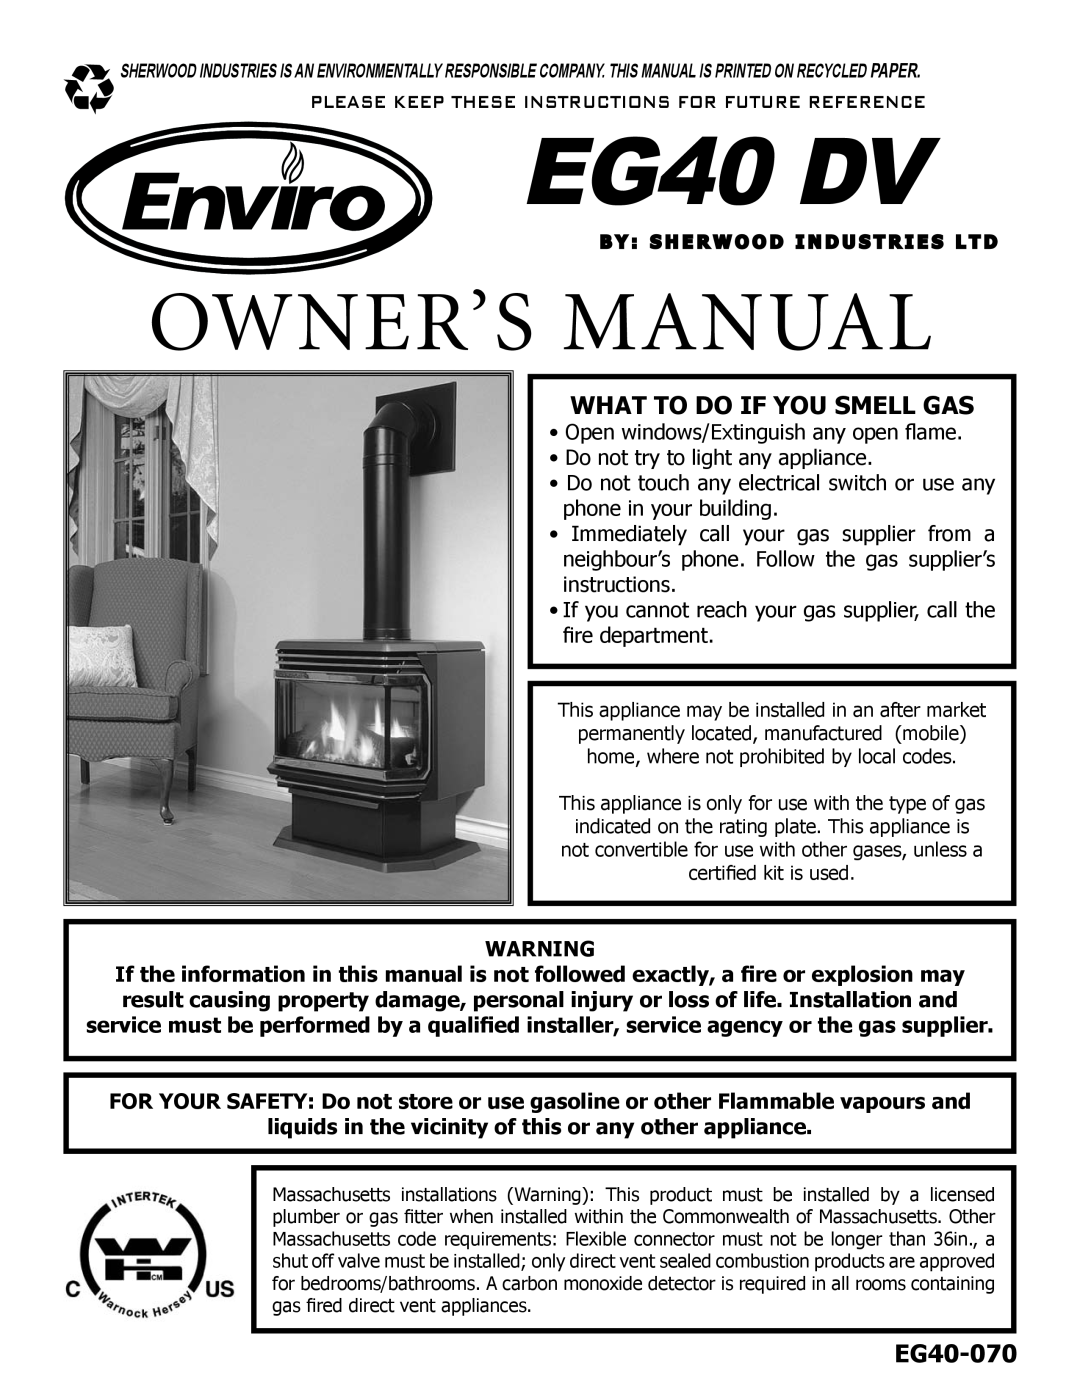 Sherwood EG40 DV owner manual What To Do If You Smell Gas, EG40-070 